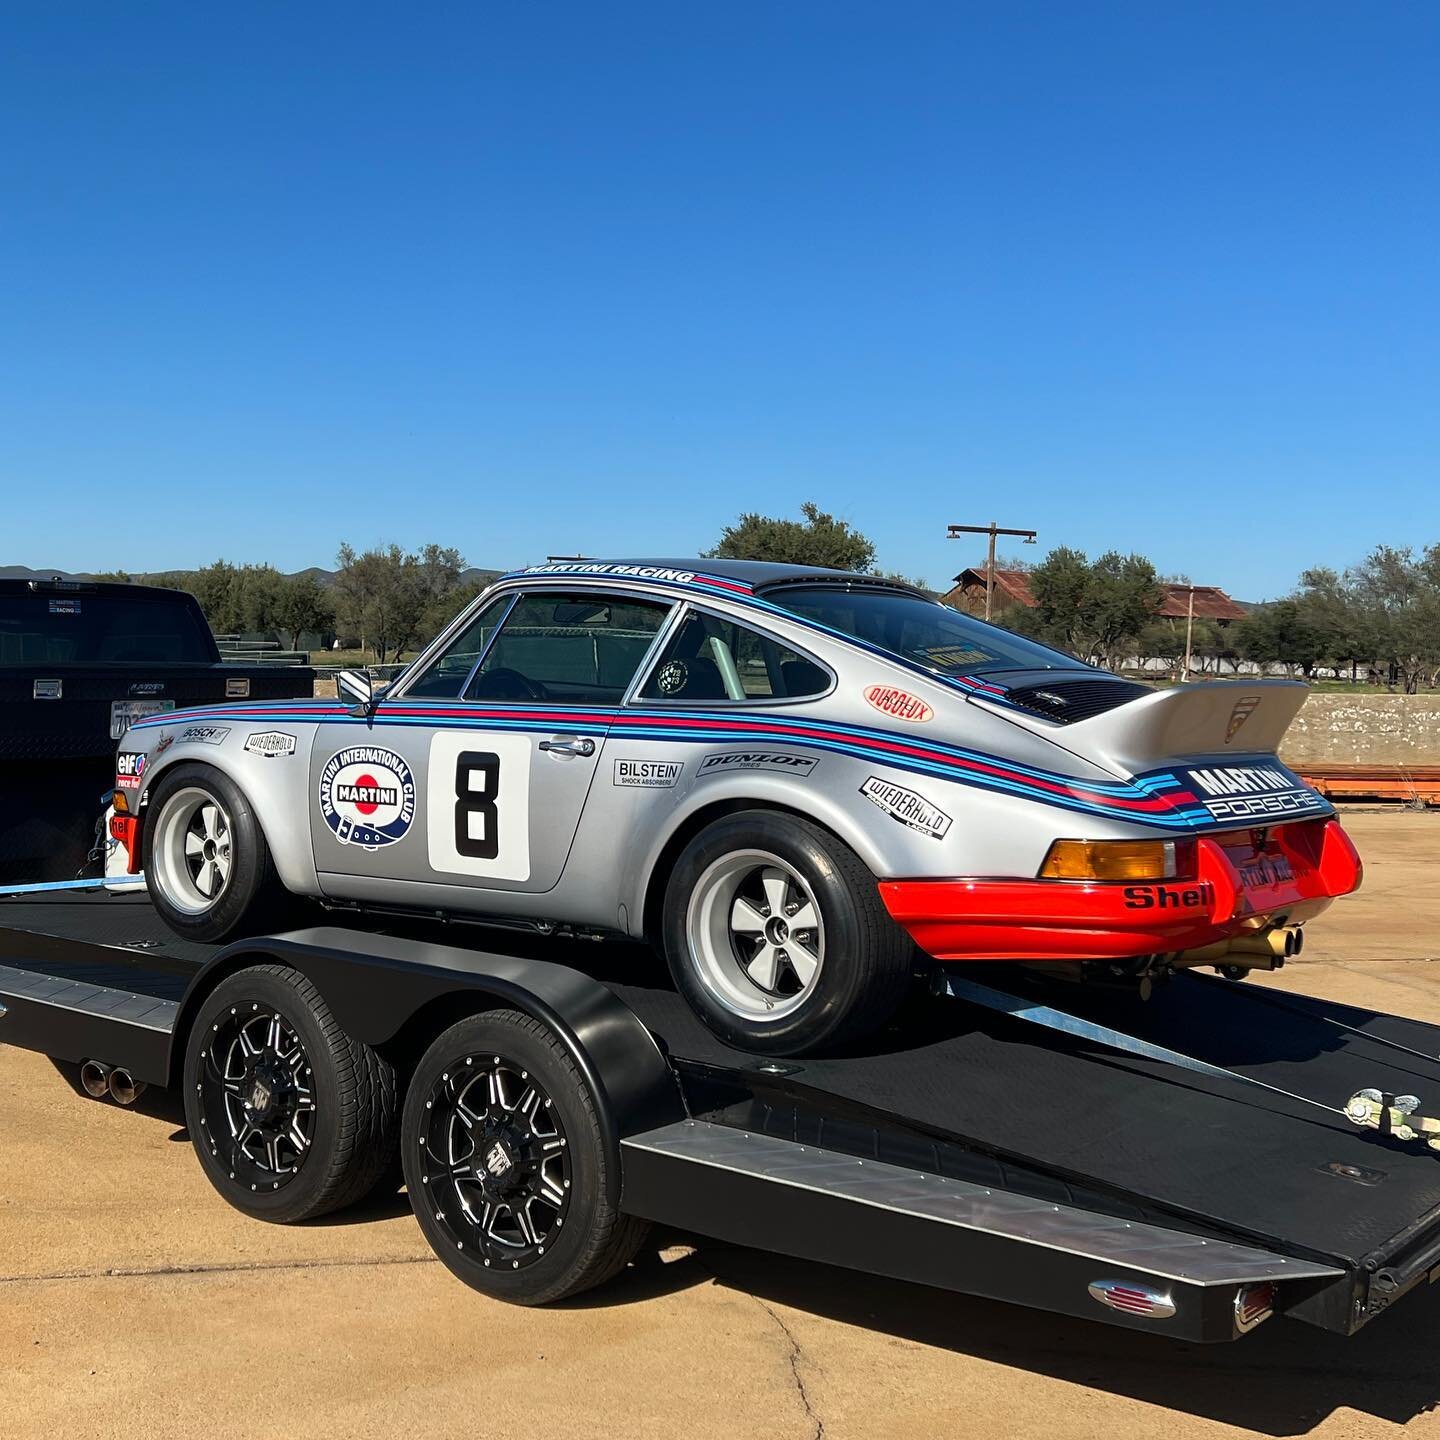 Make sure to tune in to @thehoonigans this Monday to see our Martini RSR in &ldquo;This vs. That&rdquo; on YouTube! We won&rsquo;t give any teasers other than that we were very happy with how our car performed 👍🏼